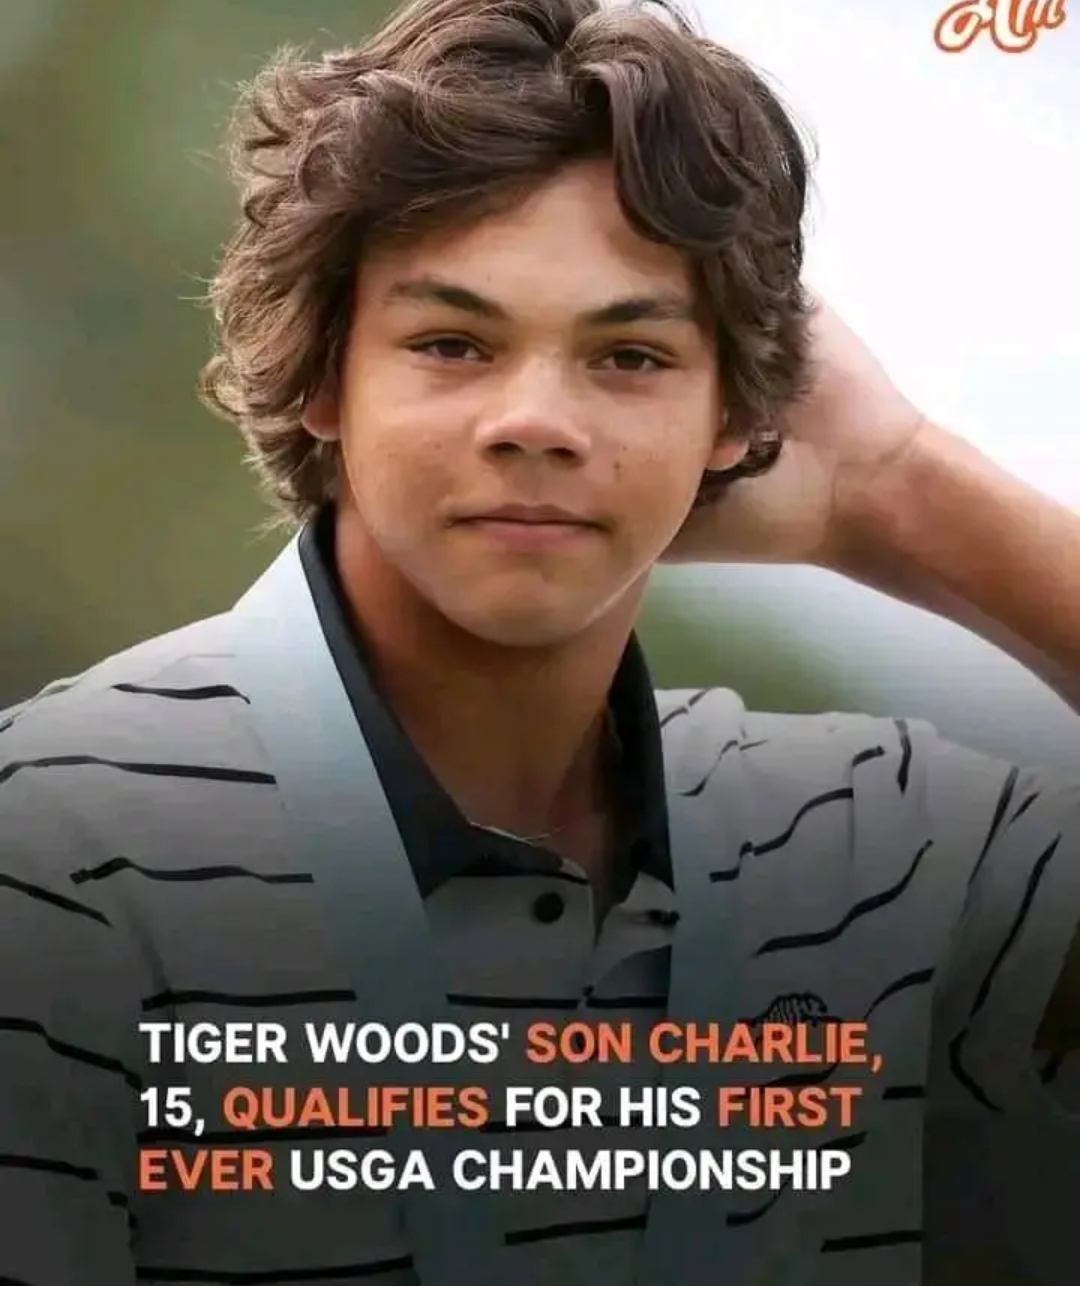 Tiger woods son charlie, 15 , Qualifies for his first ever USGA championship. Full details below 👇